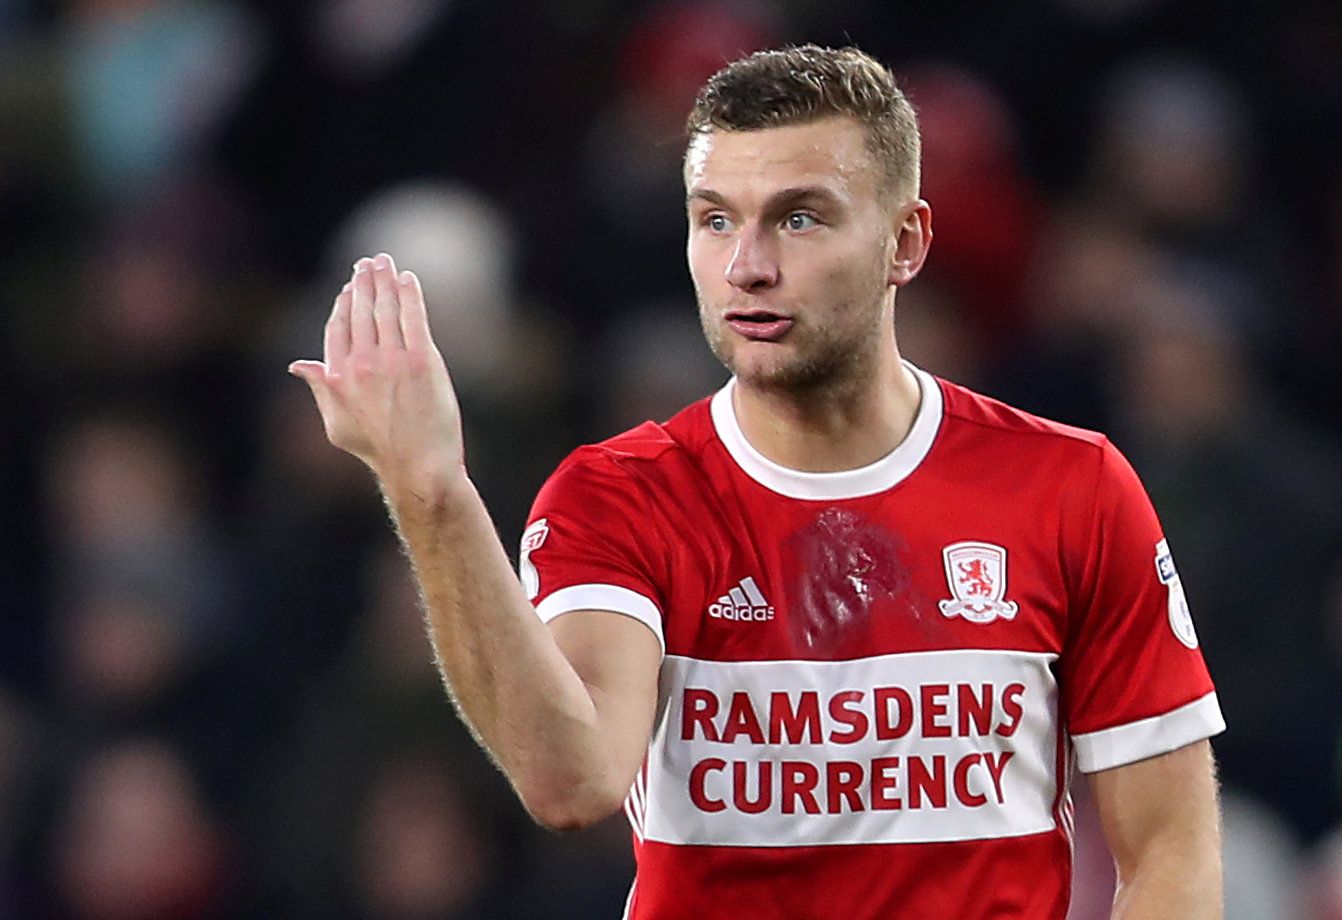 Soccer Football - Championship - Middlesbrough vs Aston Villa - Riverside Stadium, Middlesbrough, Britain - December 30, 2017   Middlesbrough’s Ben Gibson in action   Action Images/John Clifton    EDITORIAL USE ONLY. No use with unauthorized audio, video, data, fixture lists, club/league logos or 